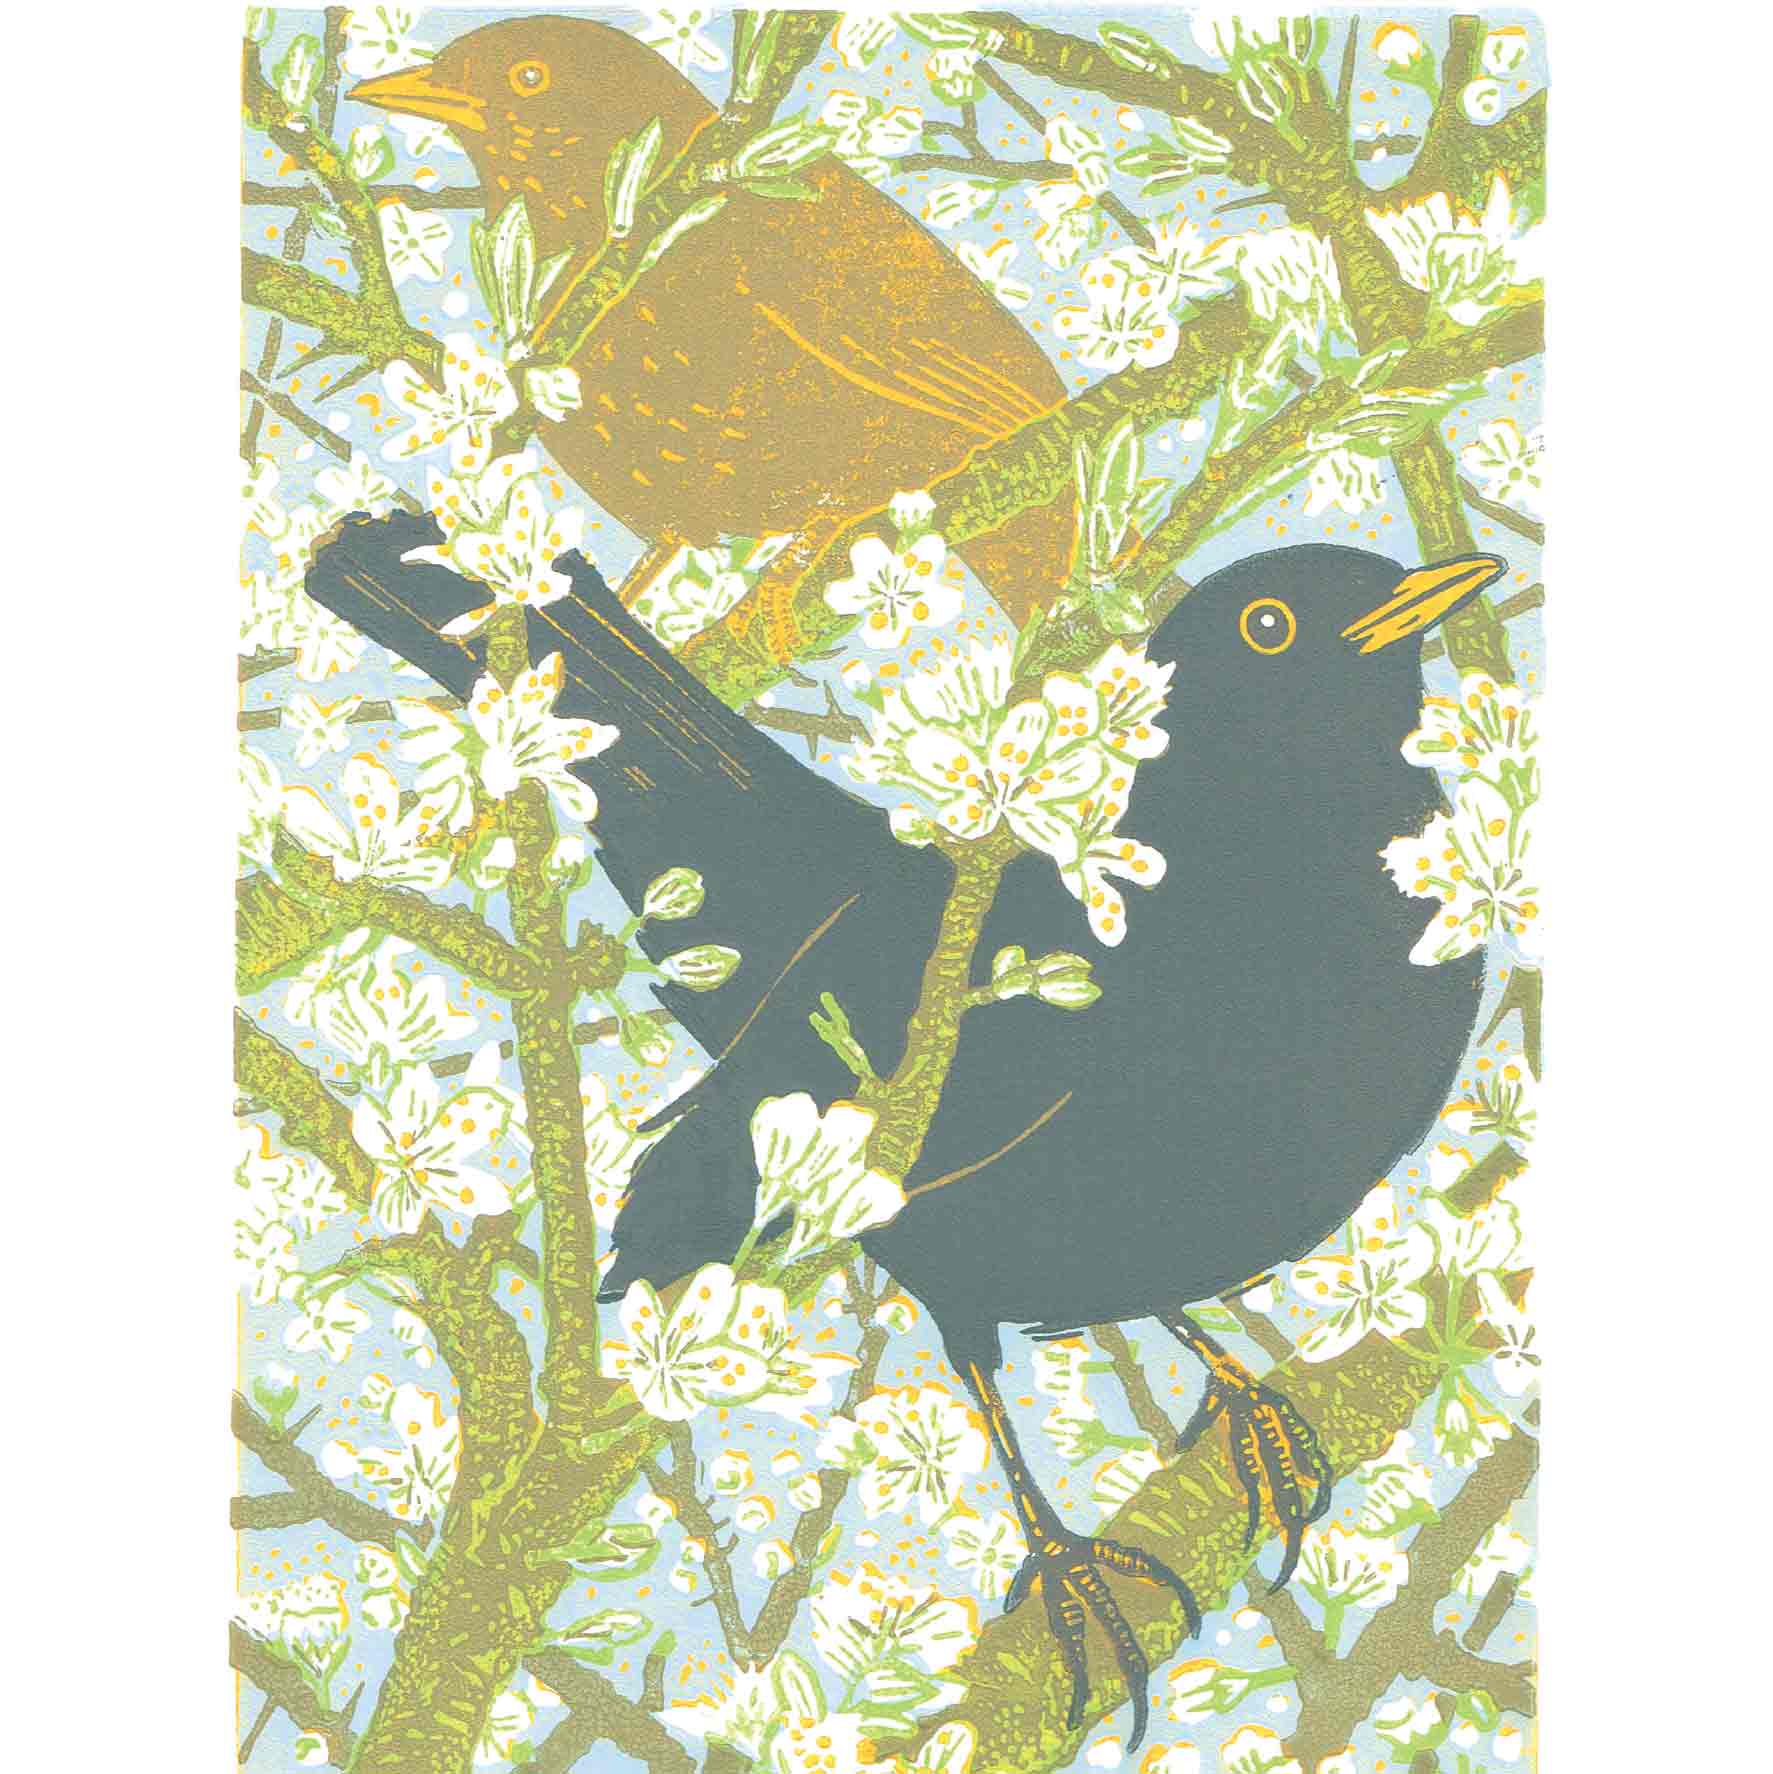 Art Greeting Card by Gary Ramskill, Blackthorn and Blackbirds, Two blackbirds in the blossom